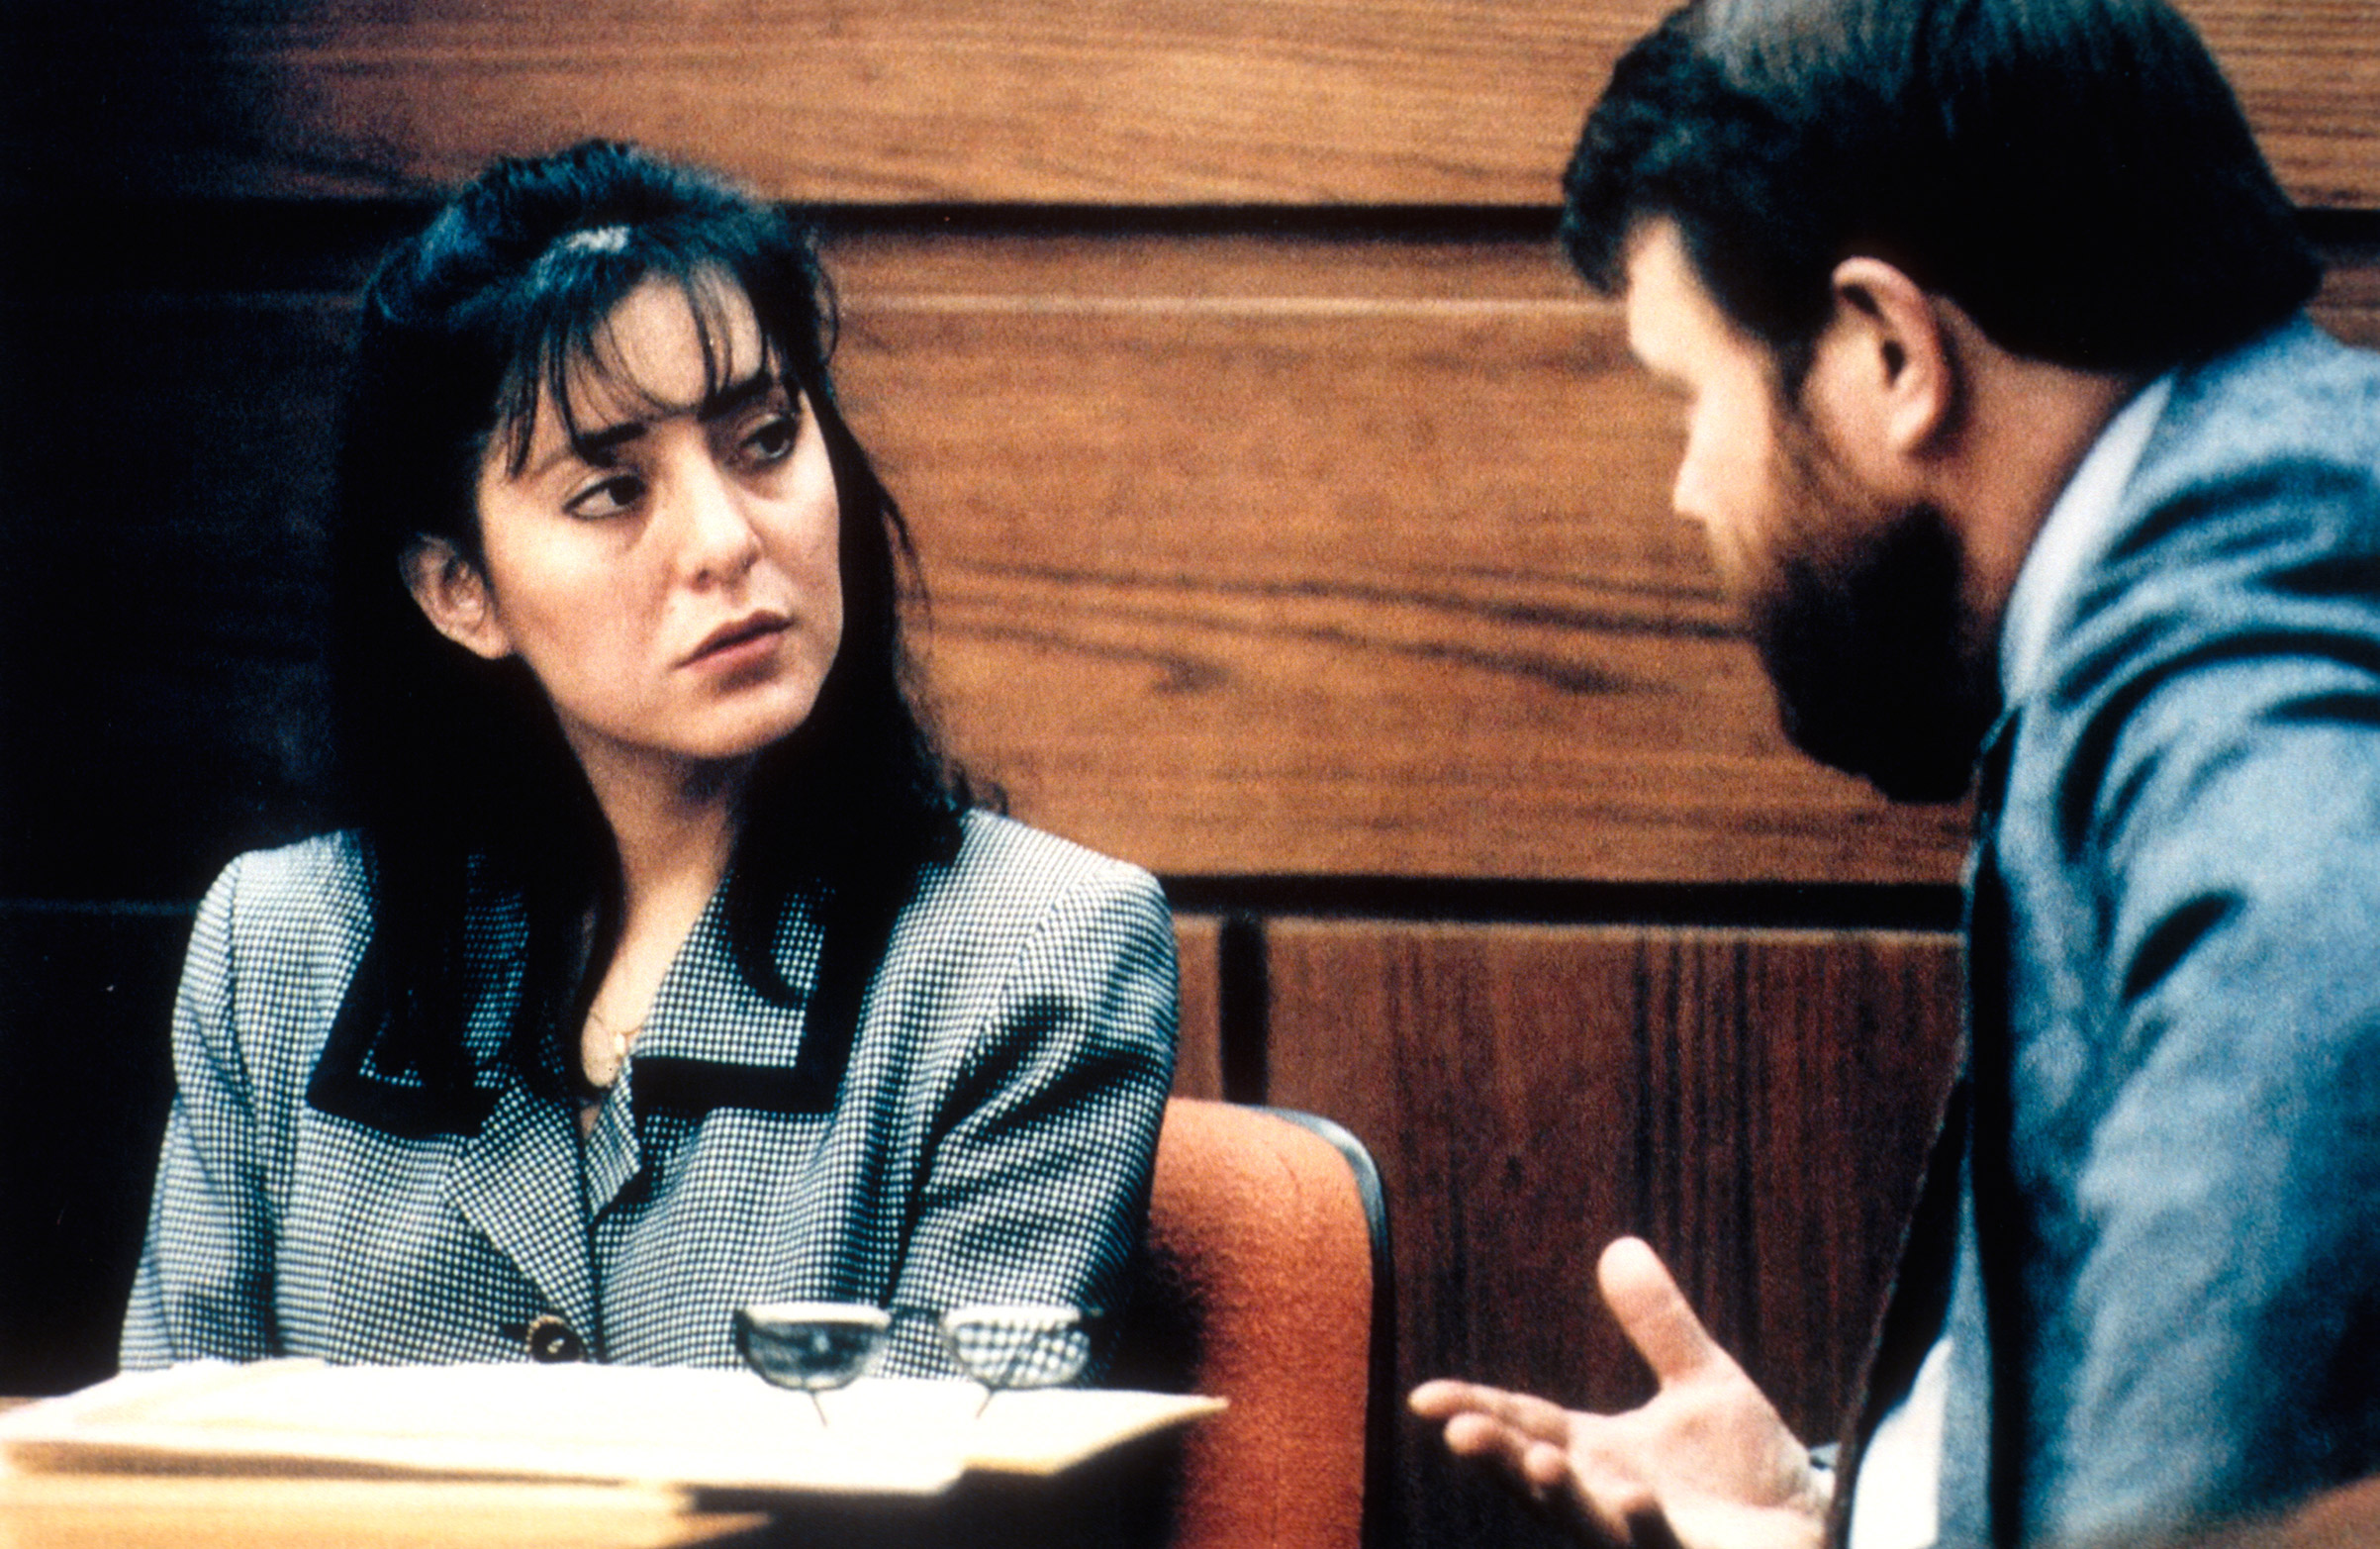 Lorena Bobbitt is questioned by an attorney during her trial 	on Jan. 10, 1994, where she is charged with 'malicious wounding' after cutting off her husband's penis following an alleged rape. (Jeffrey Markowitz/Sygma—Getty Images)